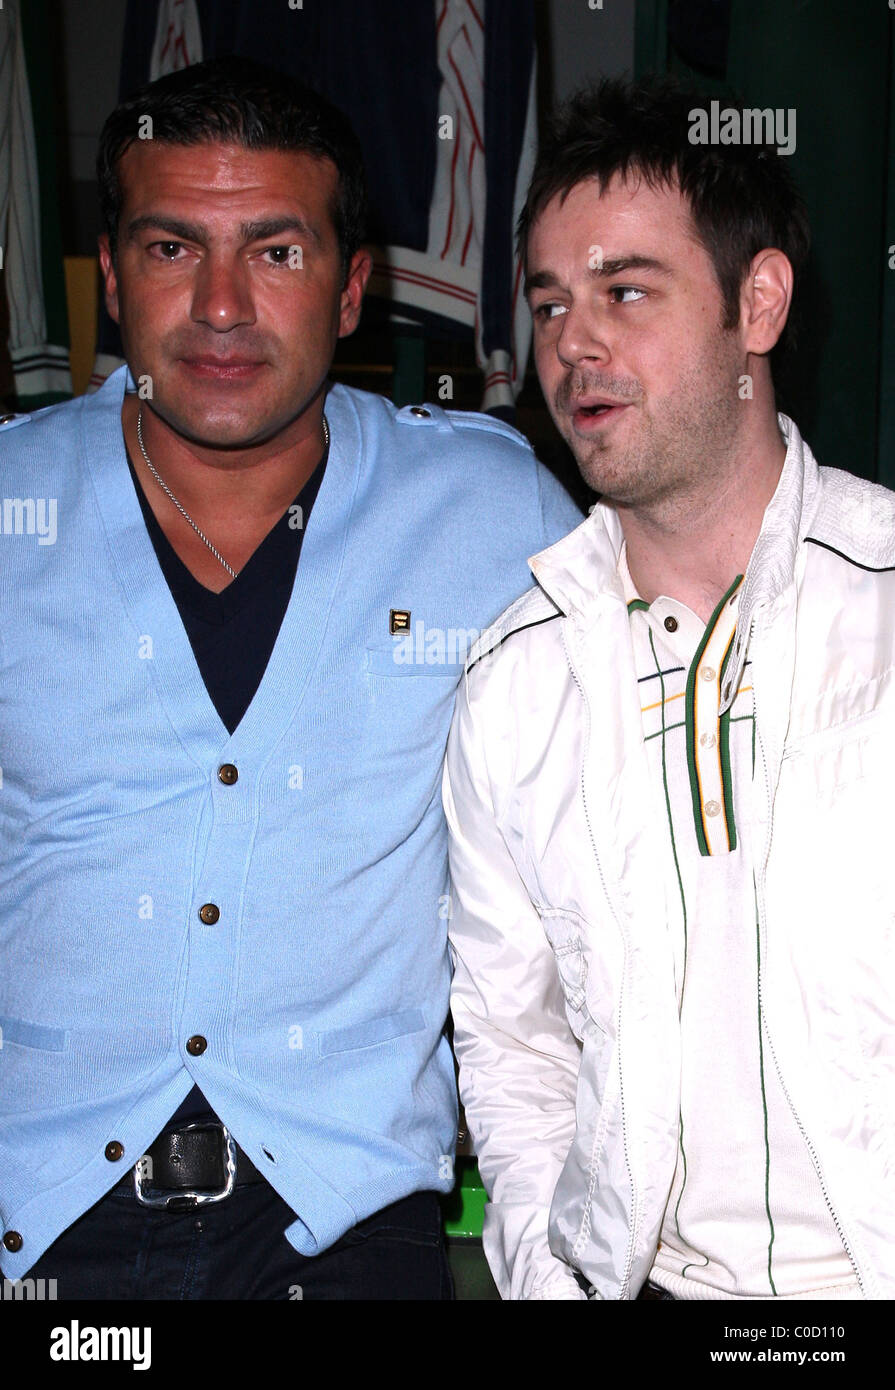 Tamer Hassan and Danny Dyer Fila host a party to celebrate 35 years in sport held at the Fila Pop Up store London, England - Stock Photo